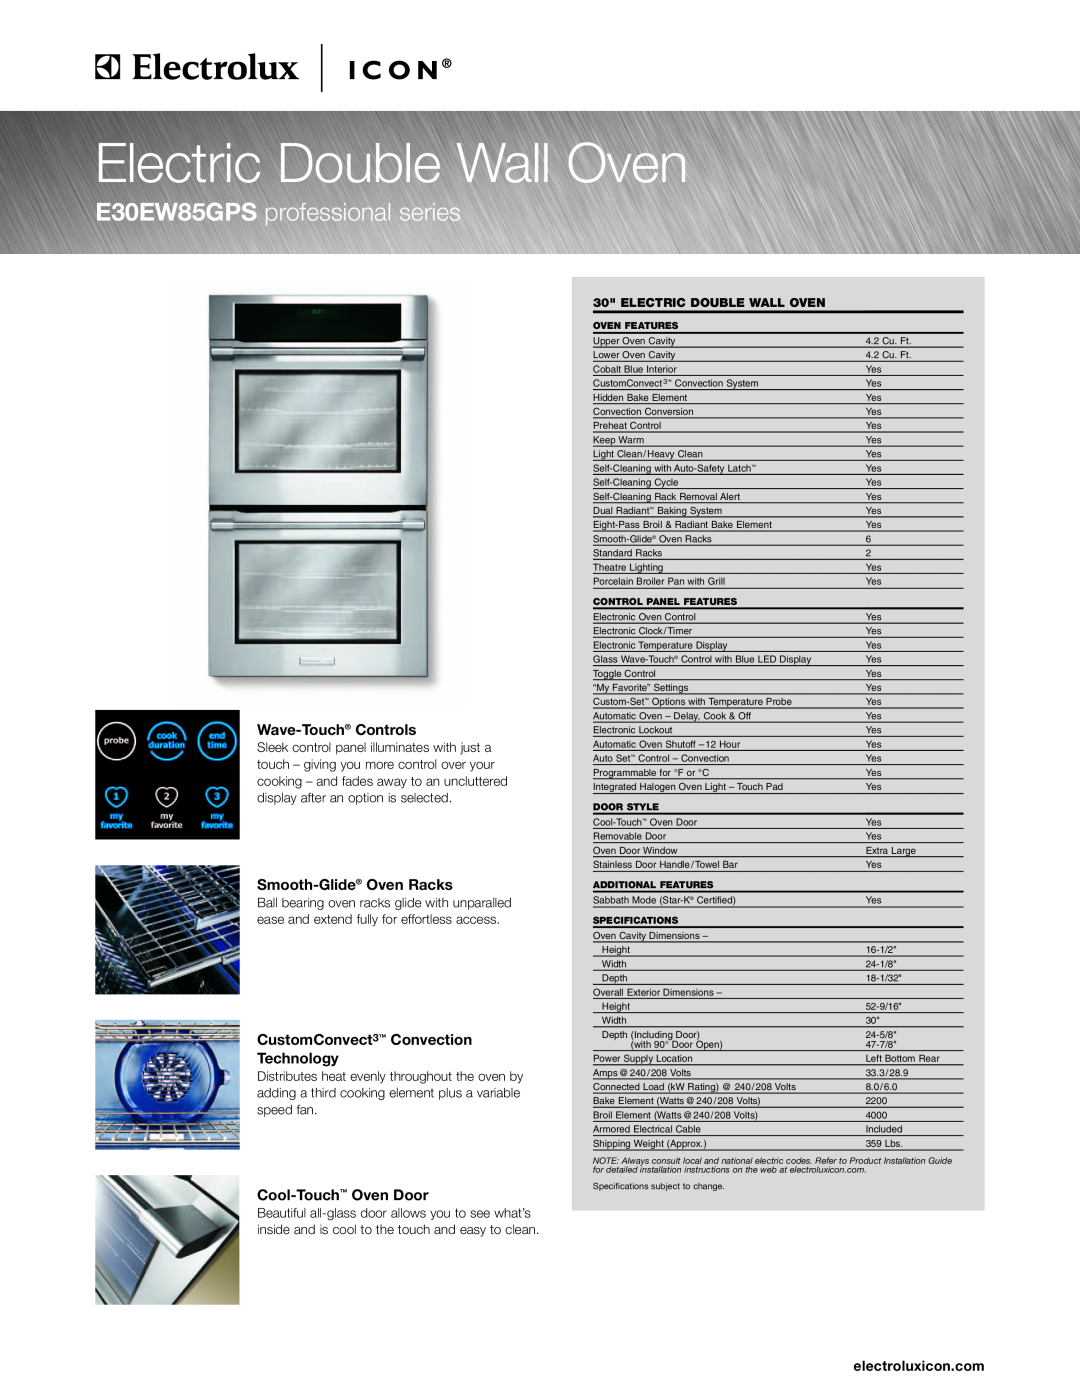 Electrolux E30EW85GPS specifications Wave-Touch Controls, Smooth-Glide Oven Racks, CustomConvect3 Convection Technology 